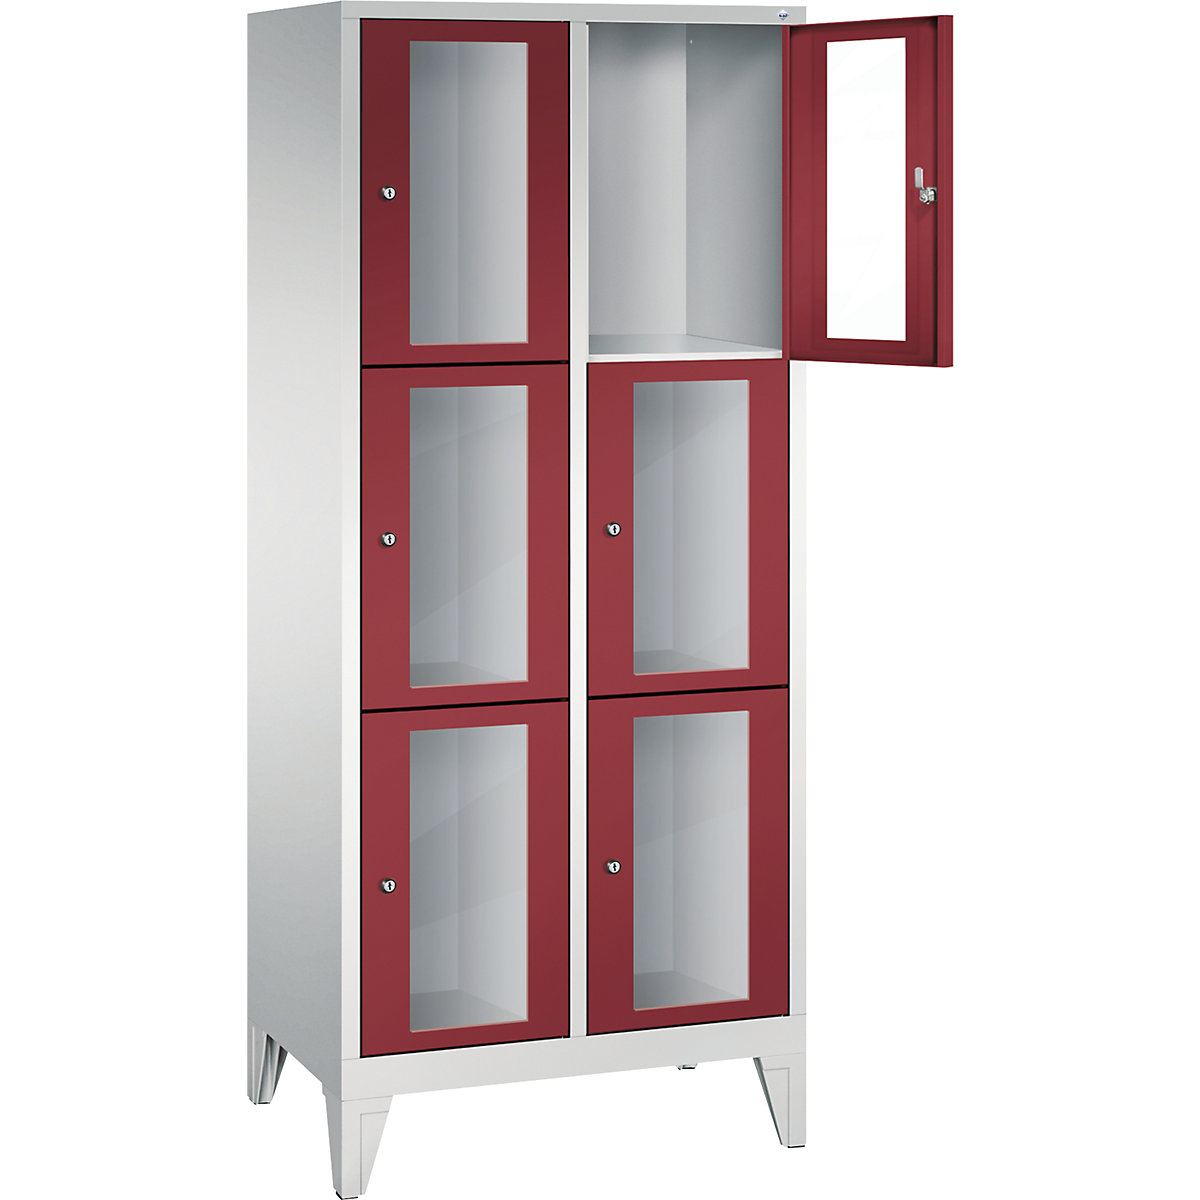 C+P – CLASSIC locker unit, compartment height 510 mm, with feet